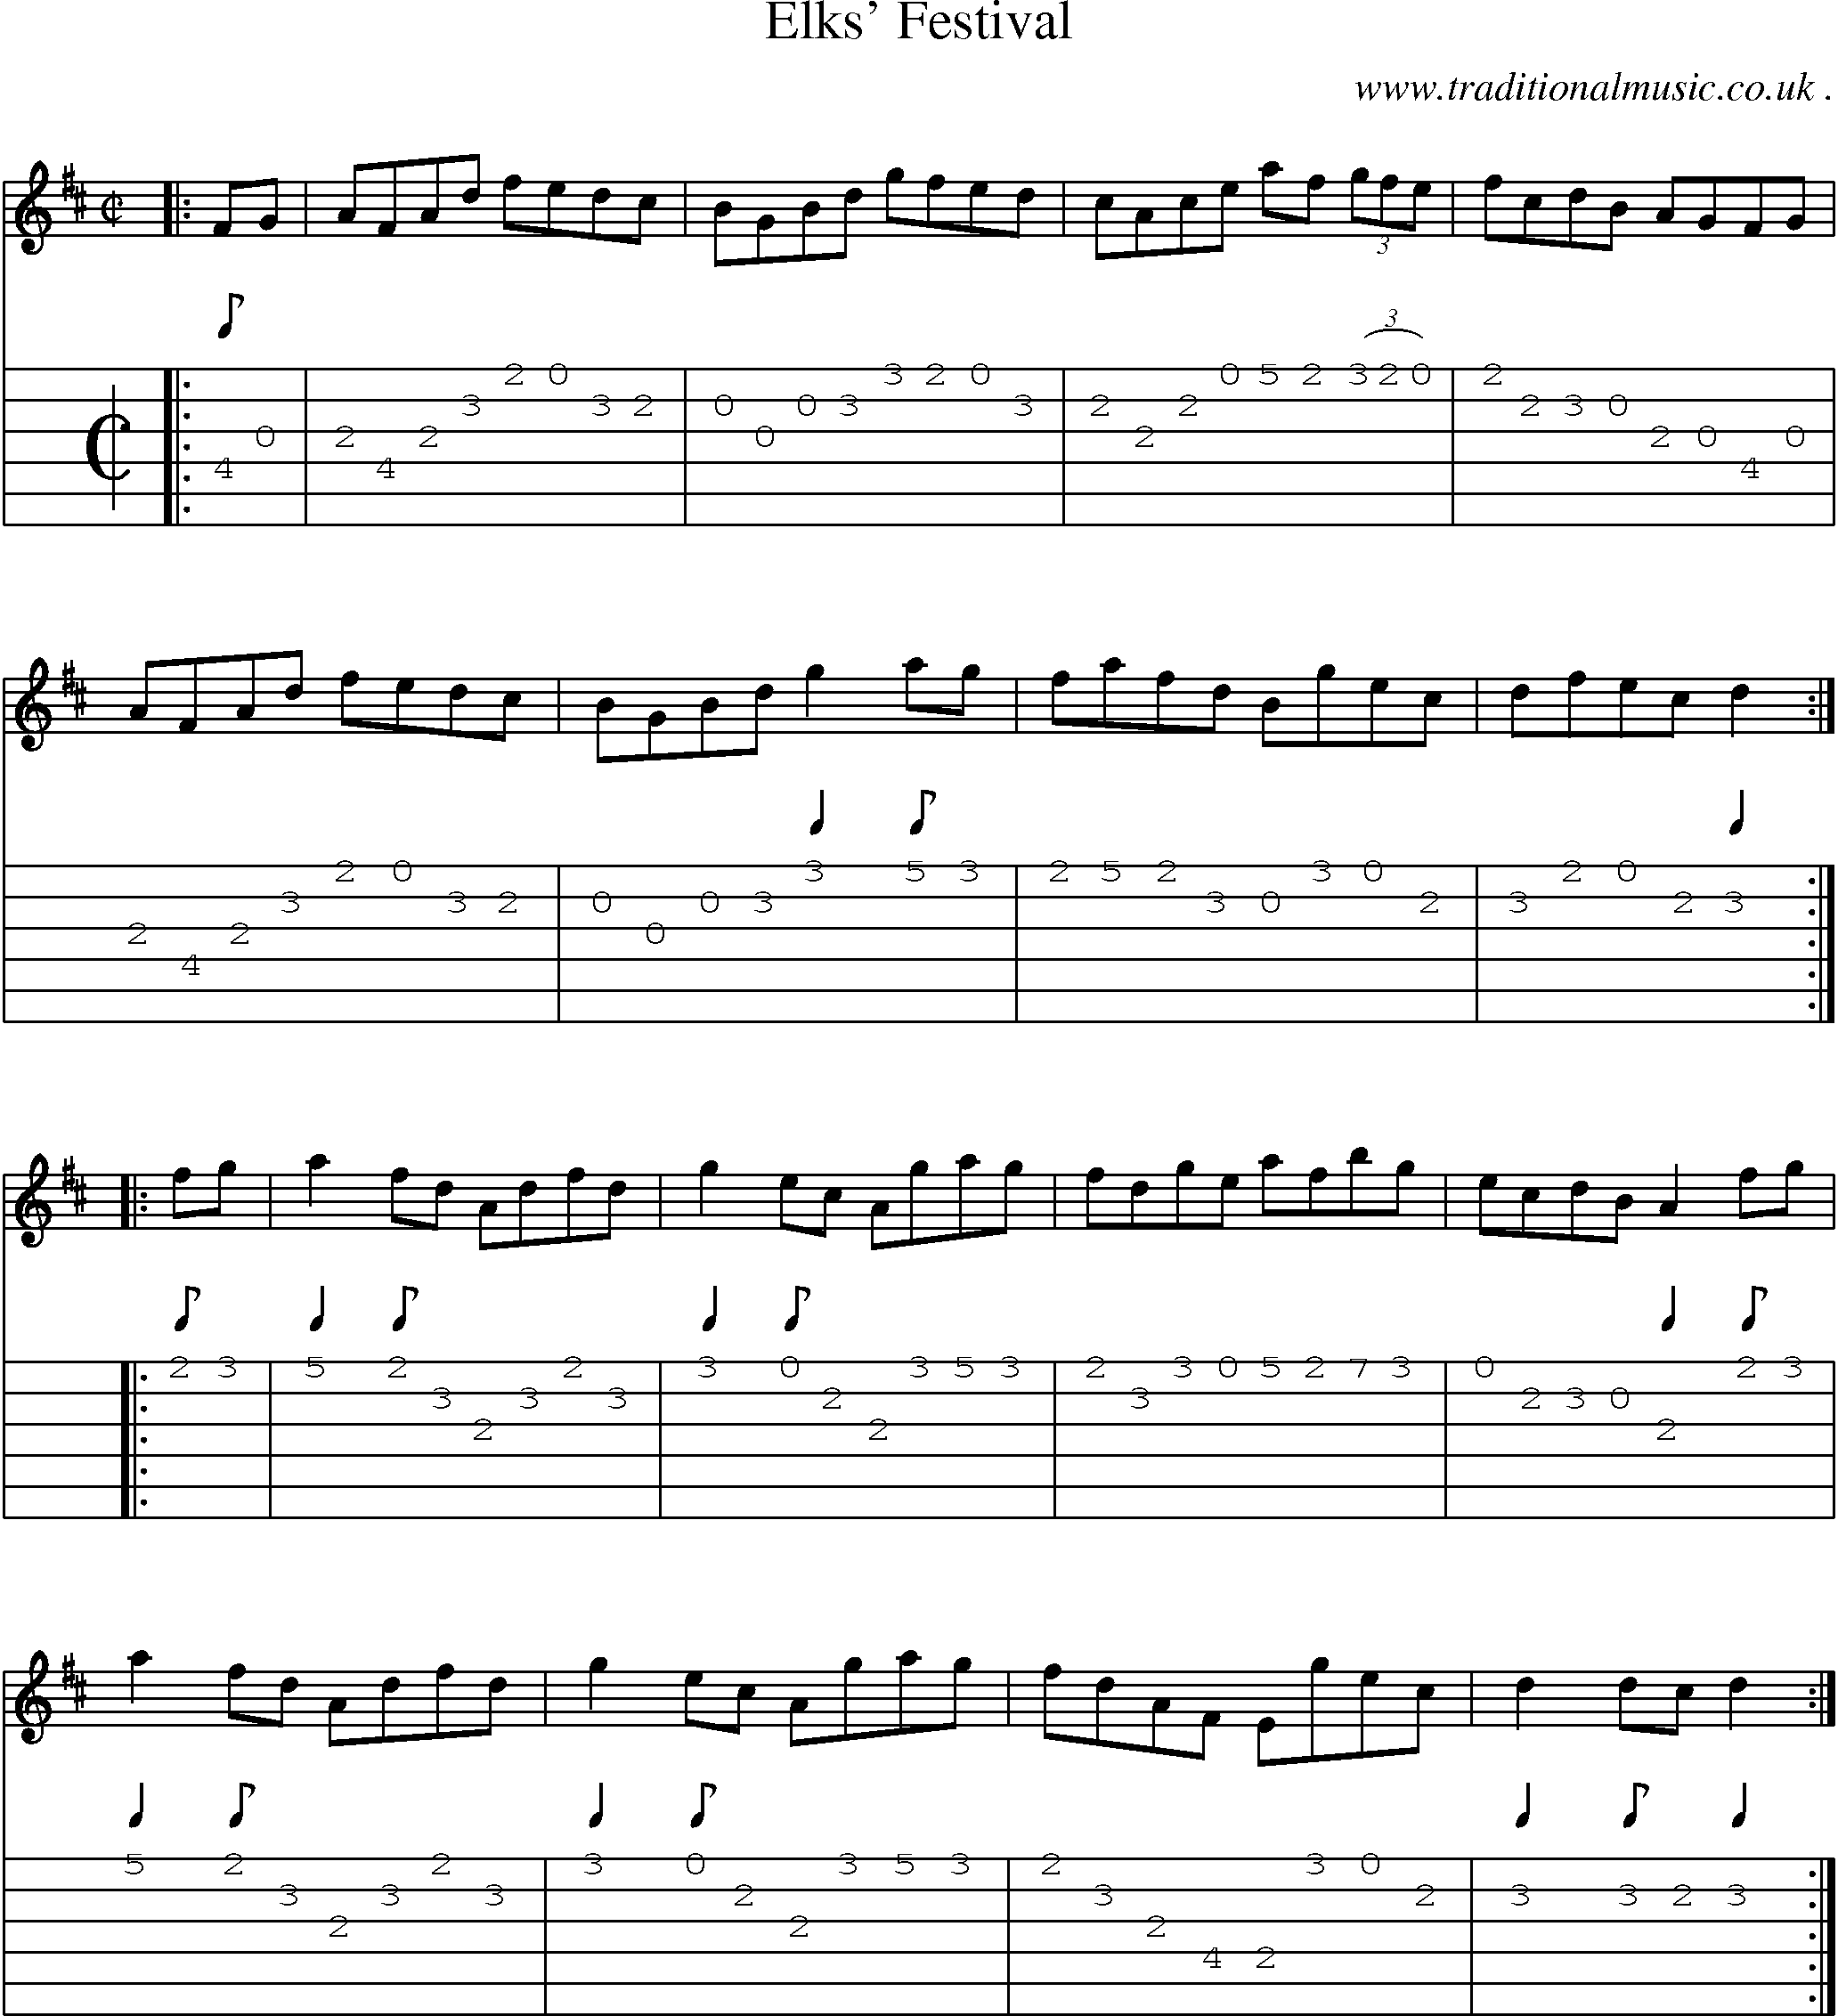 Sheet-Music and Guitar Tabs for Elks Festival